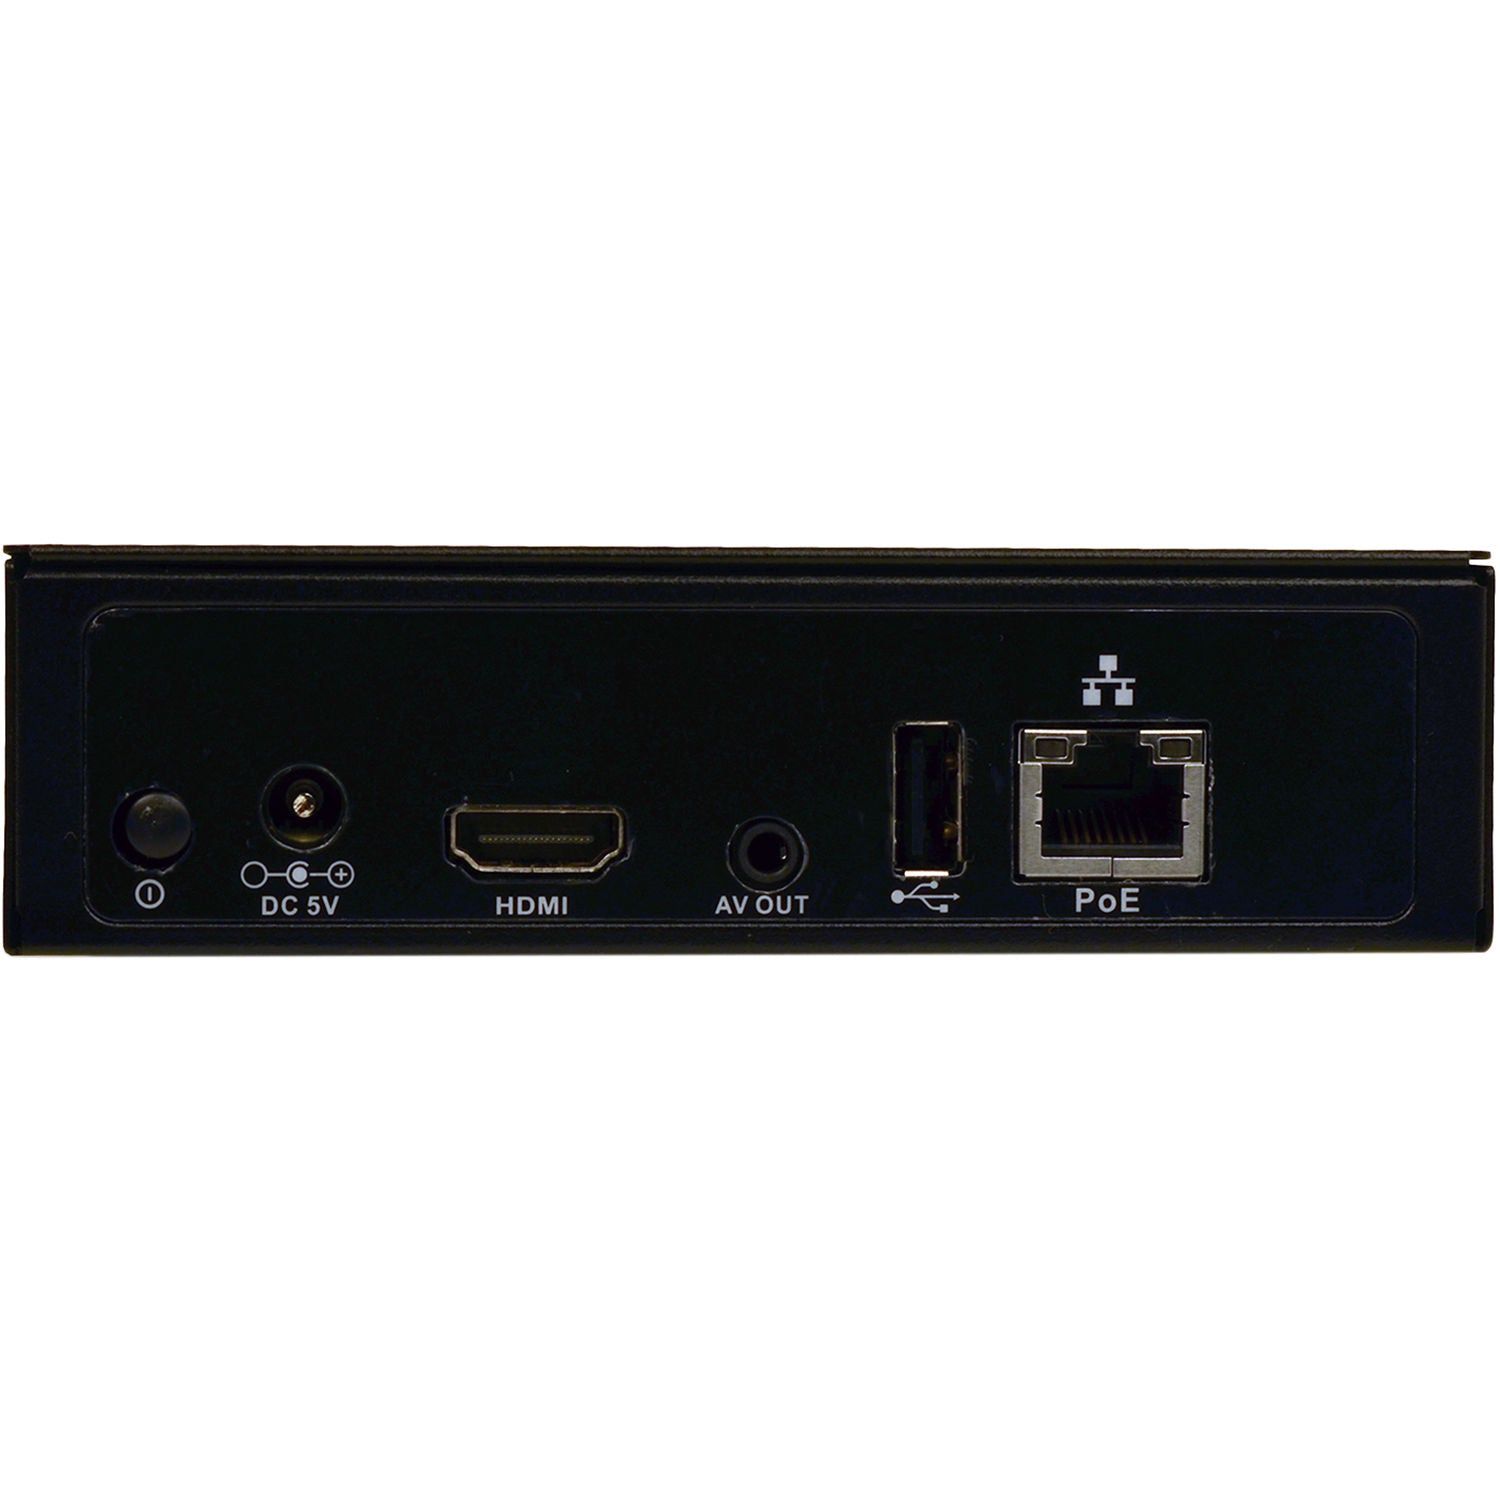 ViewSonic NMP012-S Sigma Design ARM, Linux, 8GB Flash Media Network Video Wall Player Certified Refurbished